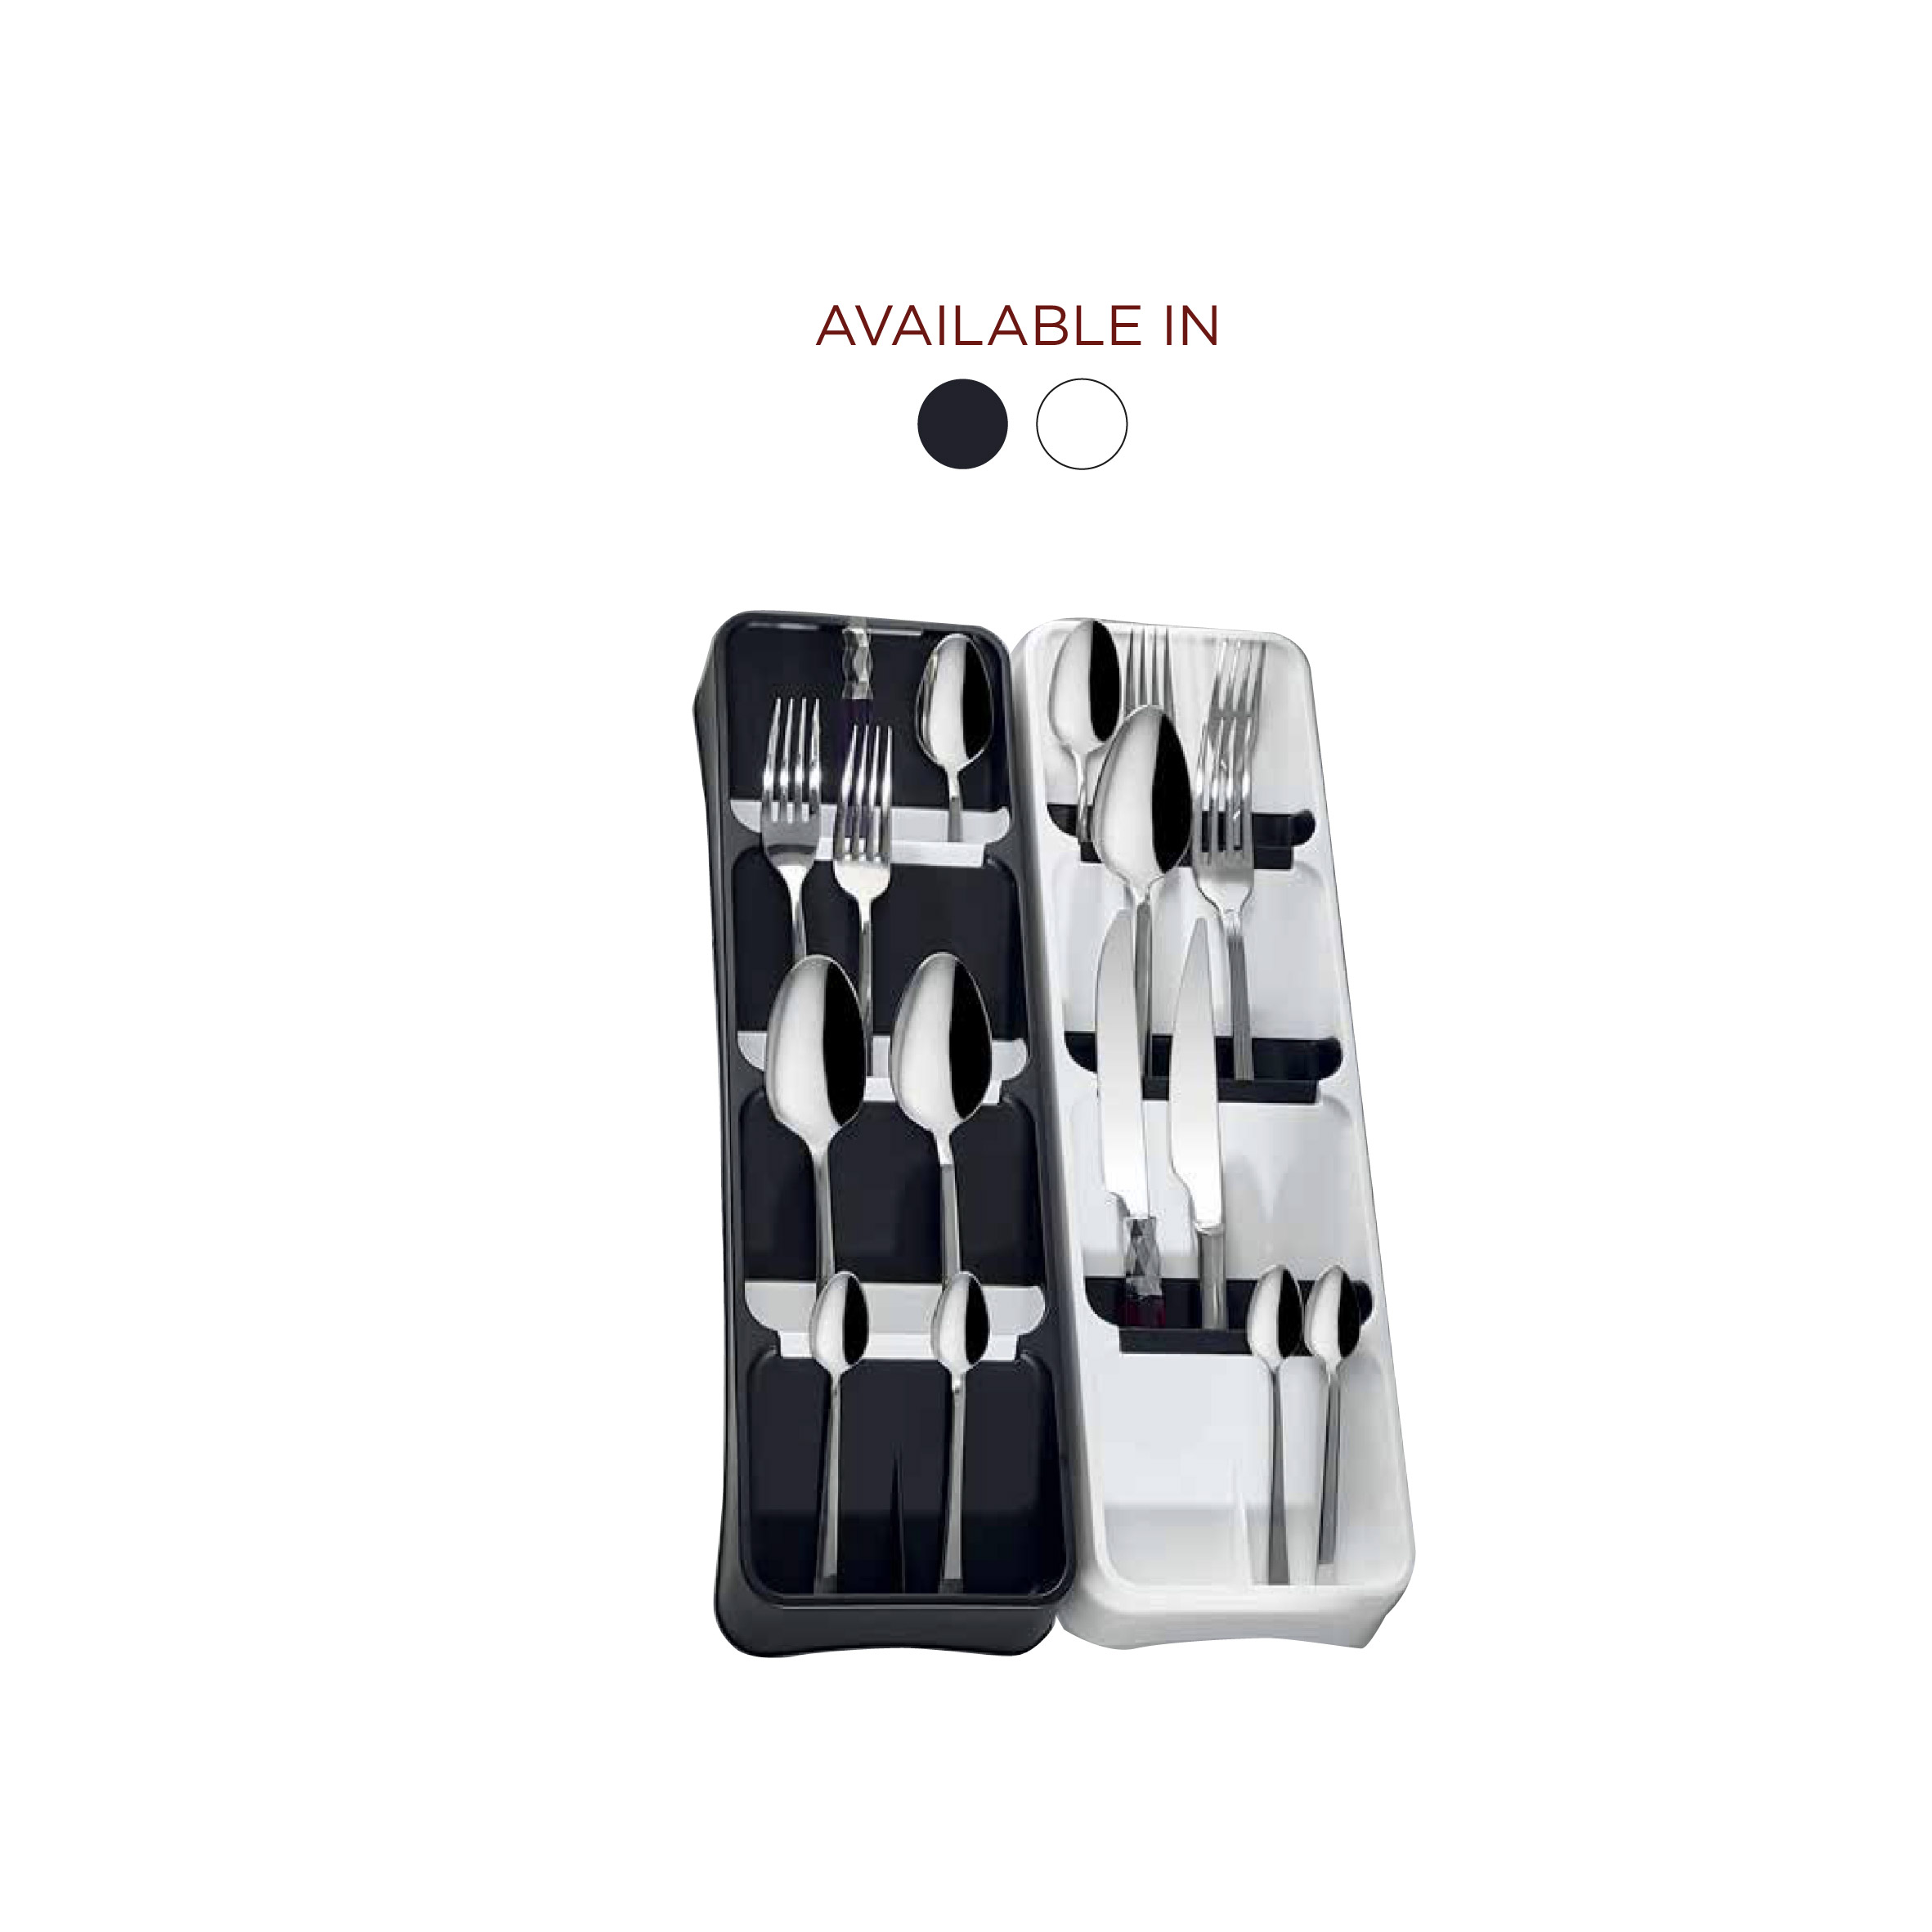 Organizer For Spoon & Fork (Available In Black / White), TUR-ORG86